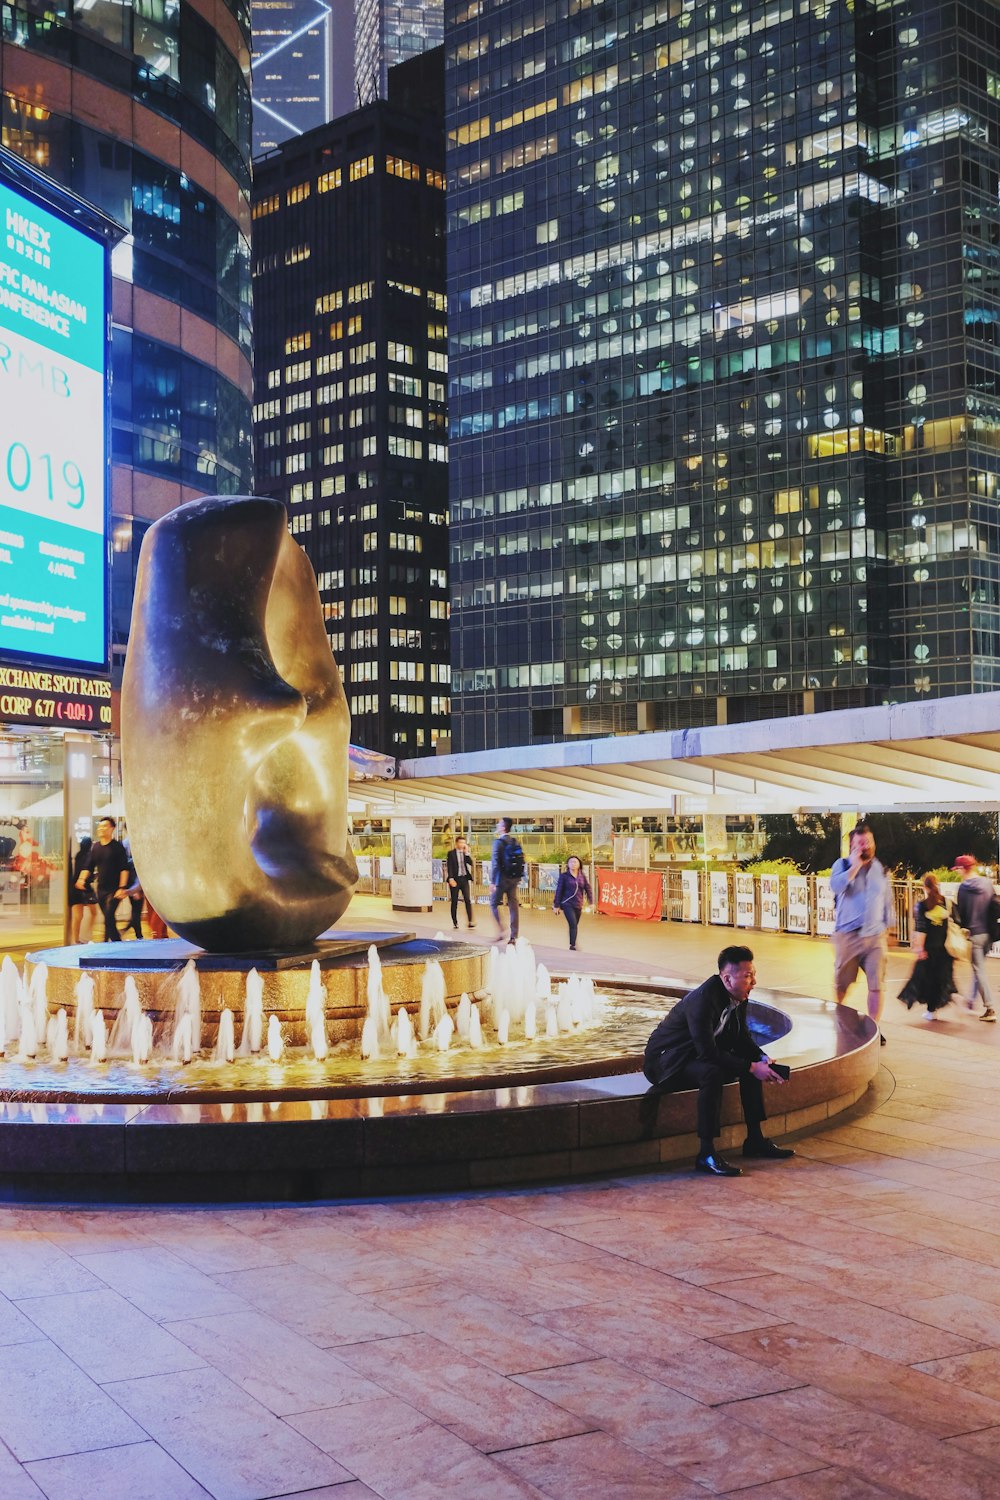 a person sitting on a bench next to a large statue of a bear